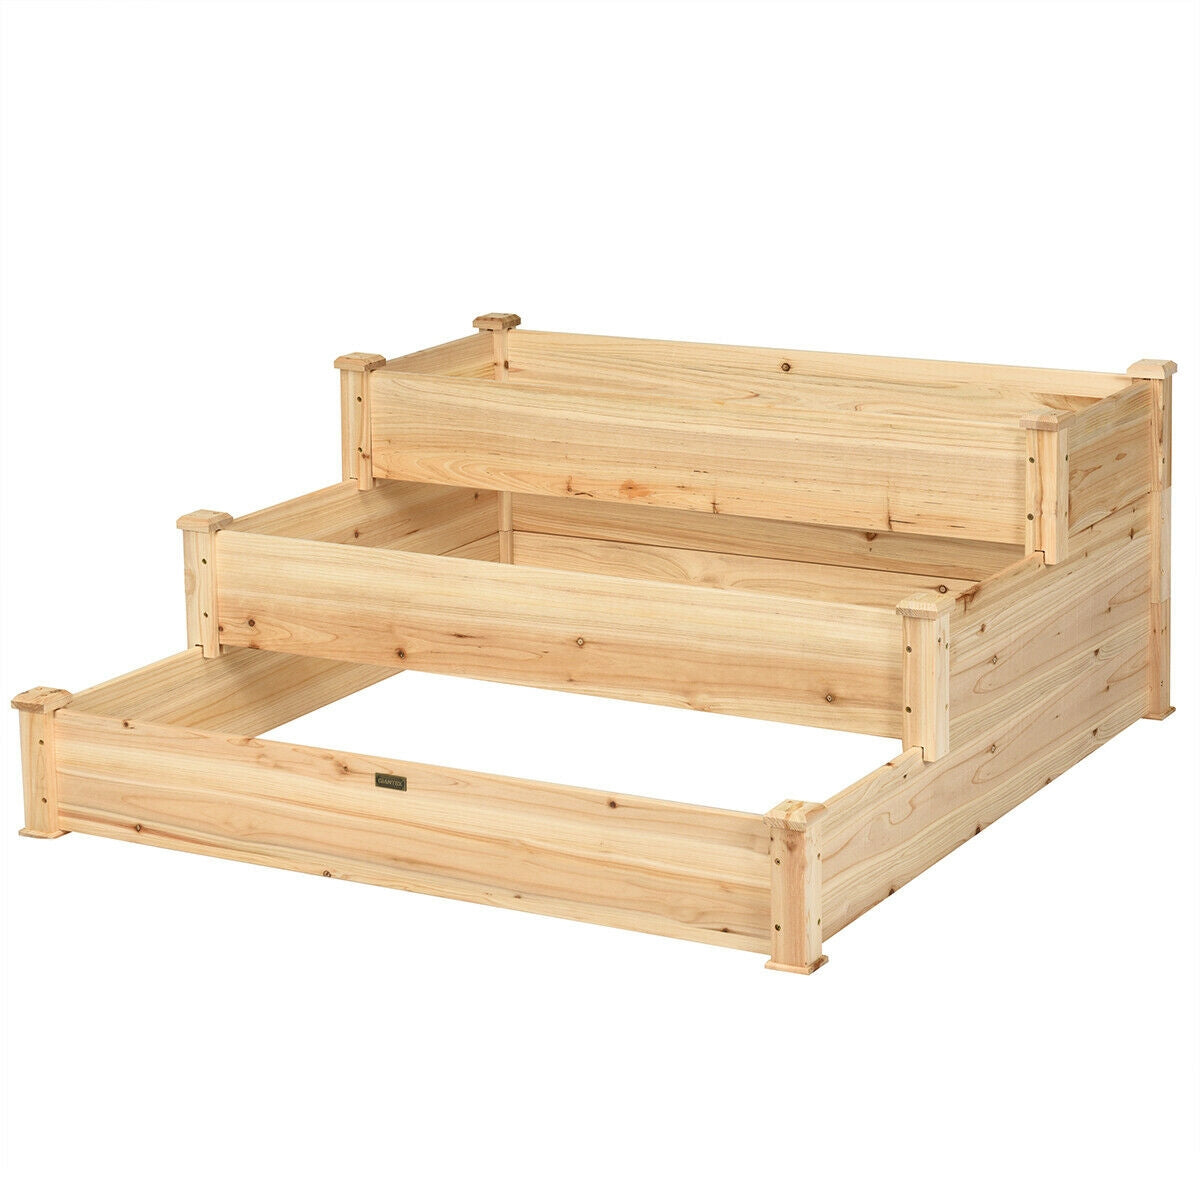 3 Tier Elevated Wooden Vegetable Garden Bed - Direct by Wilsons Home Store